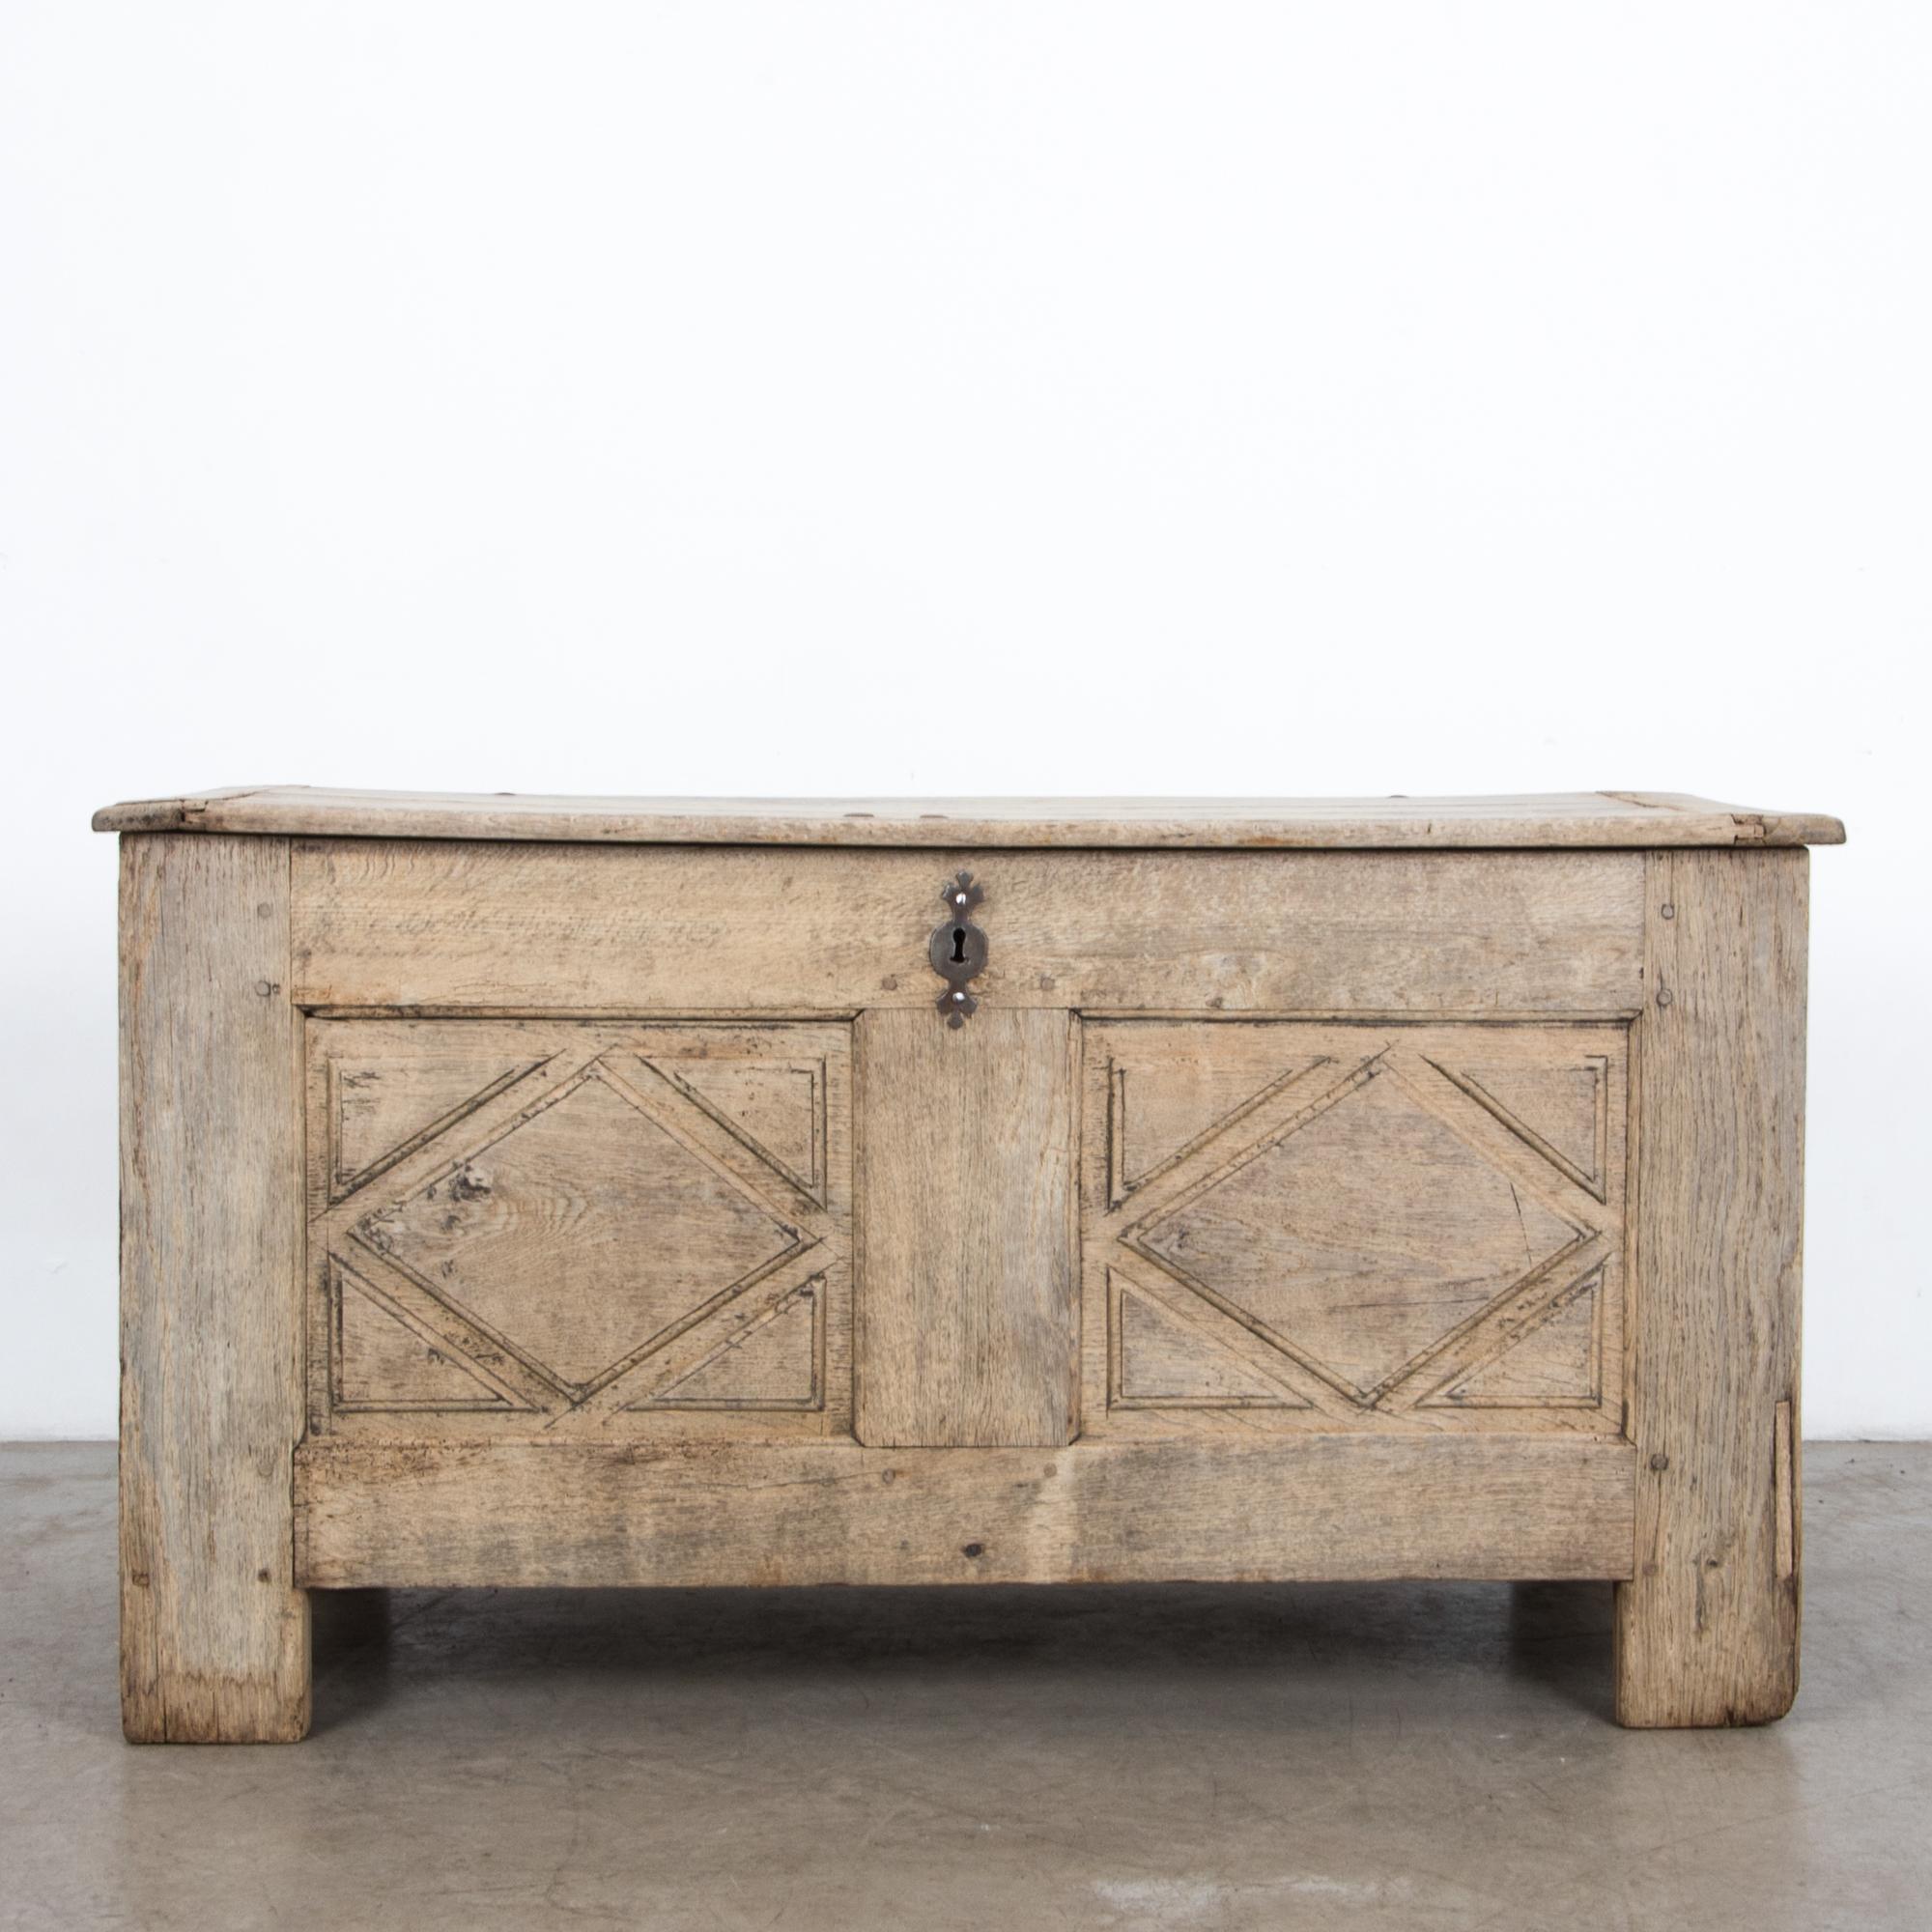 An oak trunk from France circa 1820. A sturdy construction from figured French oak is highlighted by a natural oil and wax finish. The methods of traditional craftsmen, proven by time. Featuring inside compartments, hand carved joinery, and original